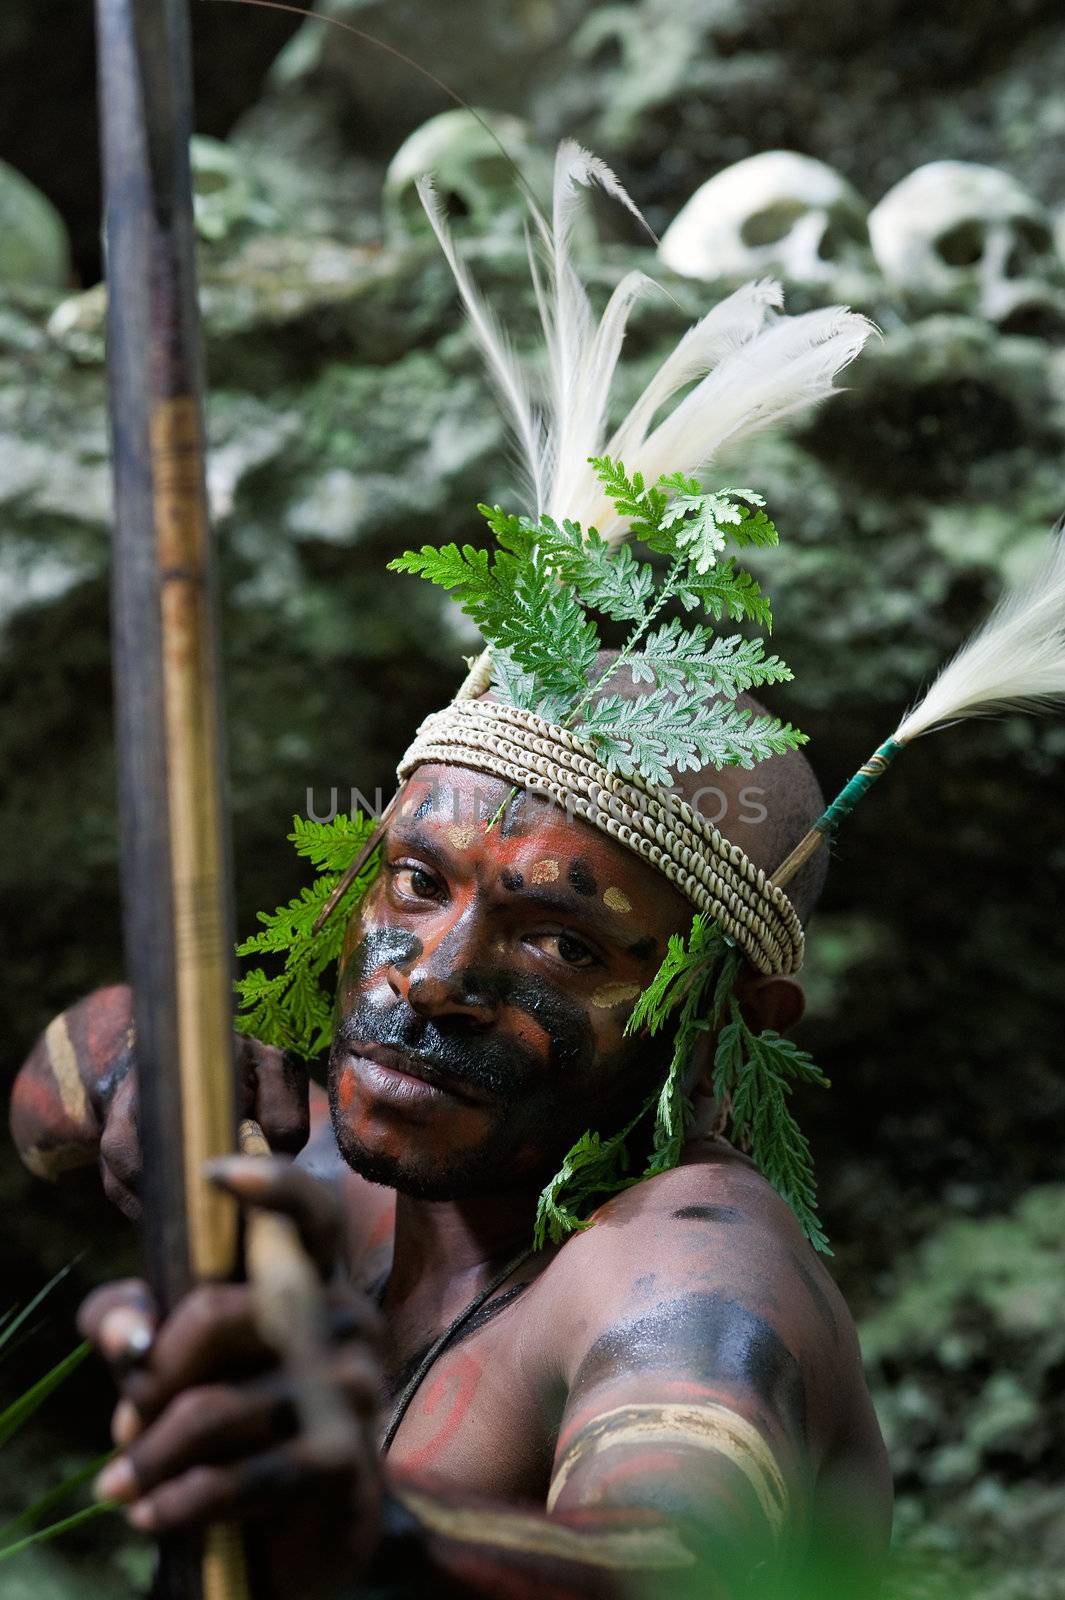 INDONESIA, NEW GUINEA, SECTOR SENGGI - 2 FEBRUARY 2009: The warrior of a Papuan tribe of Yafi in traditional clothes, ornaments and coloring. New Guinea Island, Indonesia. February 2, 2009. 